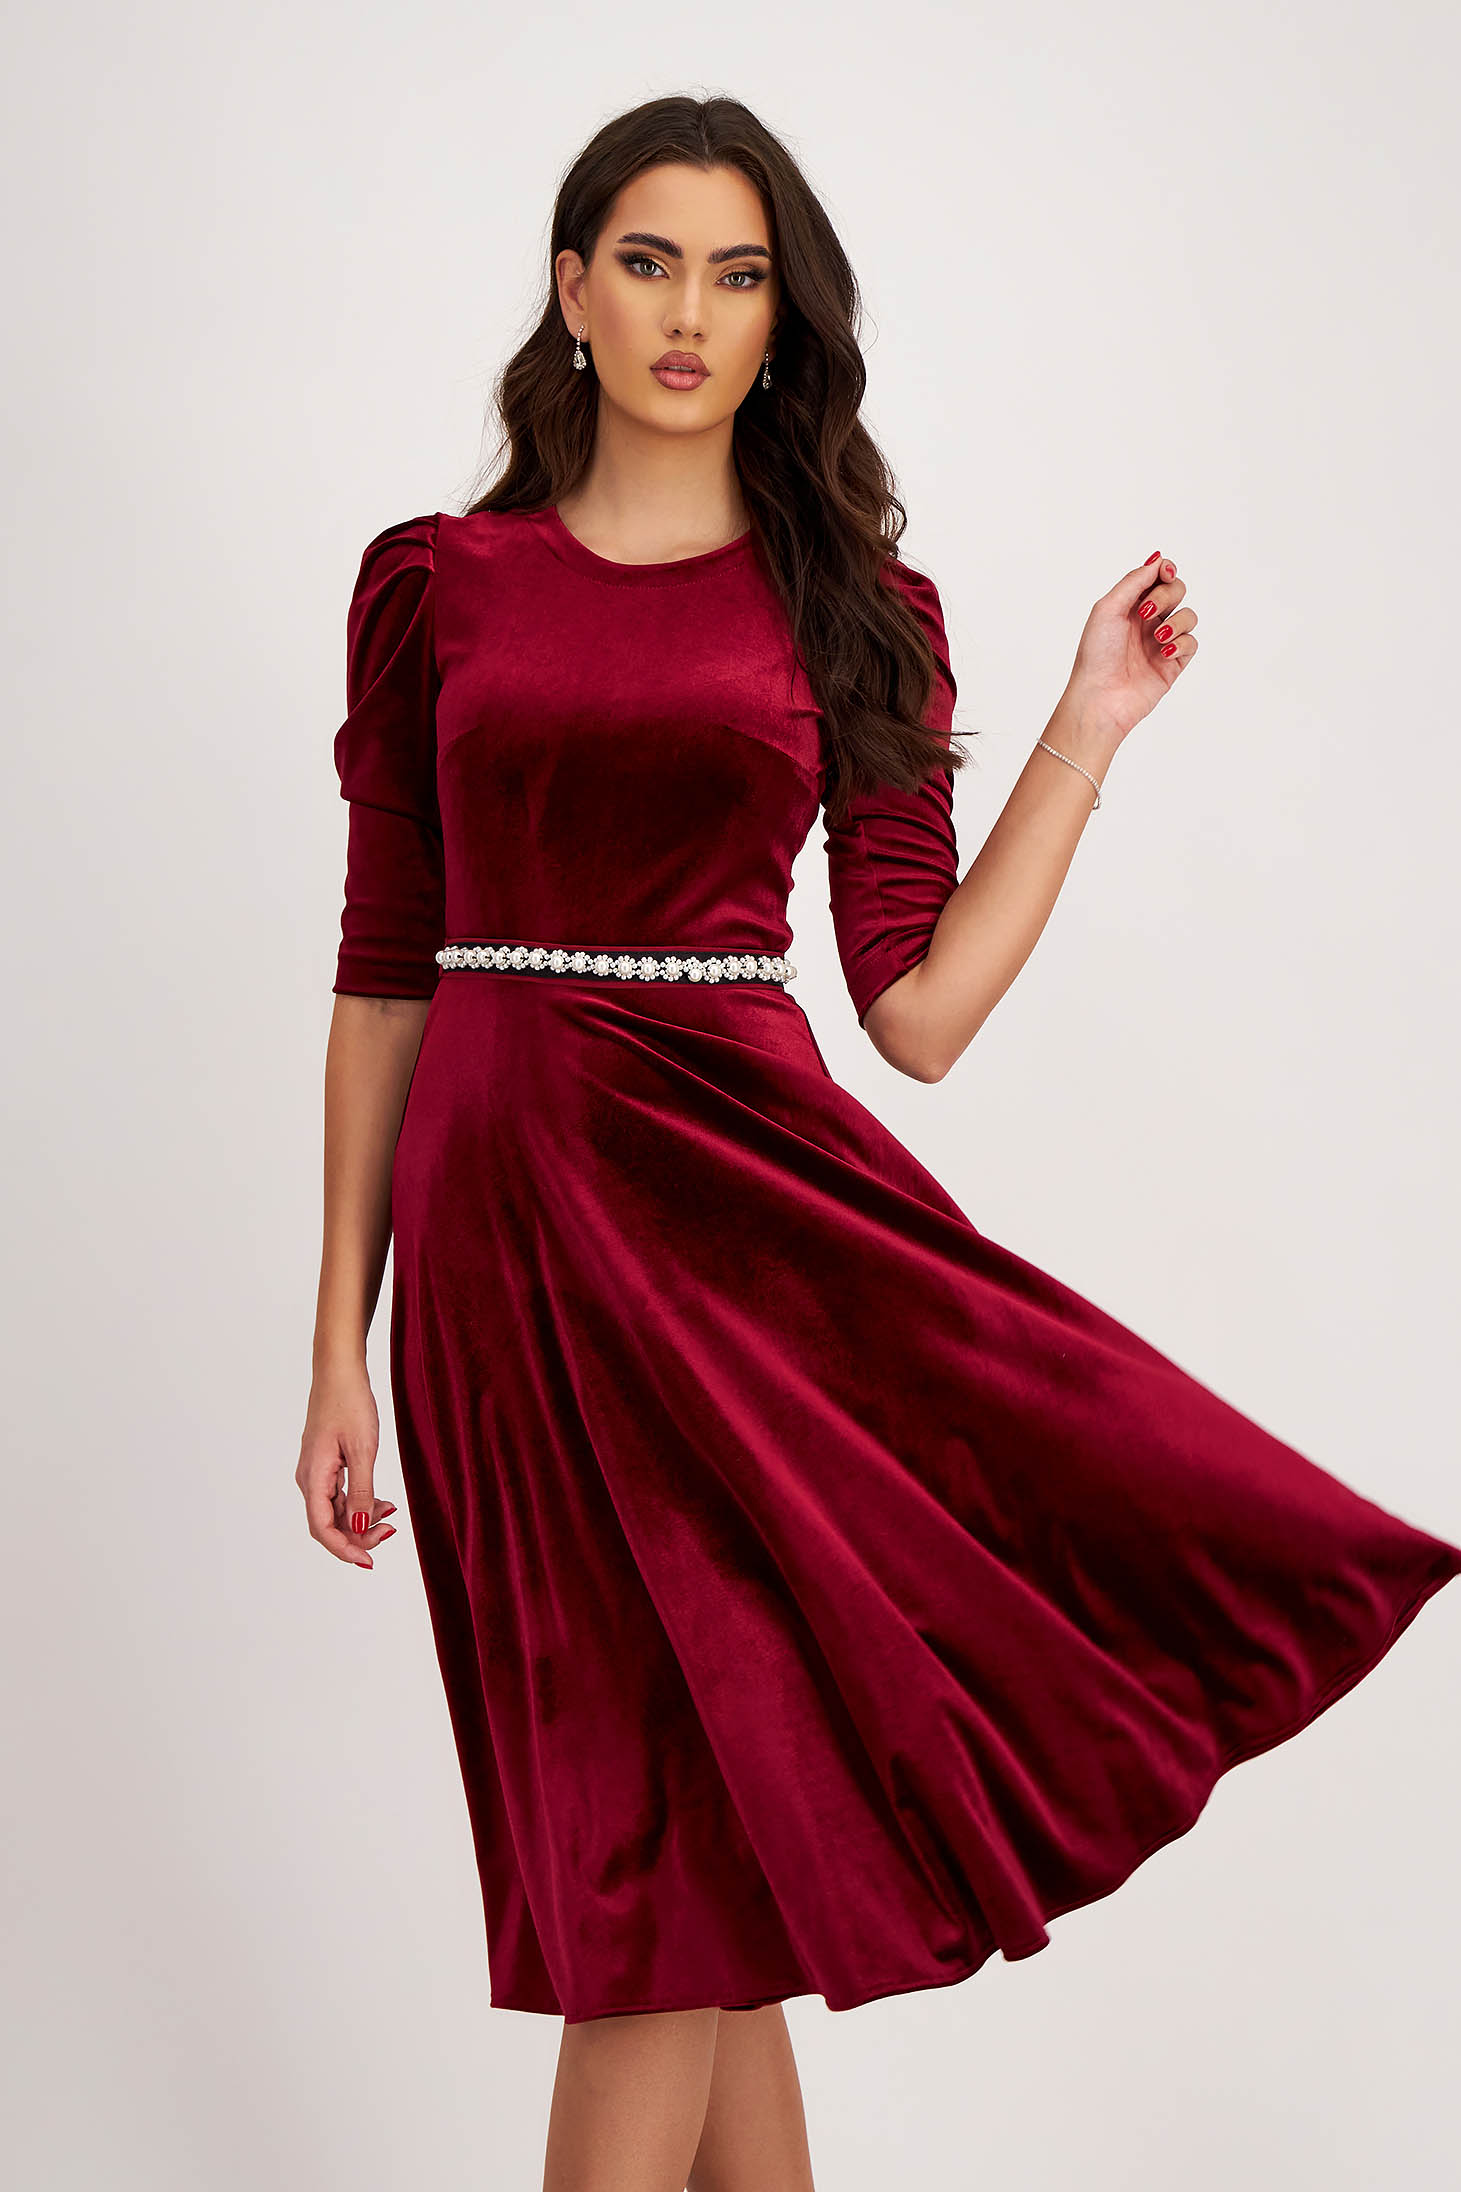 Velvet Burgundy A-Line Dress with Puffed Shoulders and Pearl Embellishments on Drawstring - StarShinerS